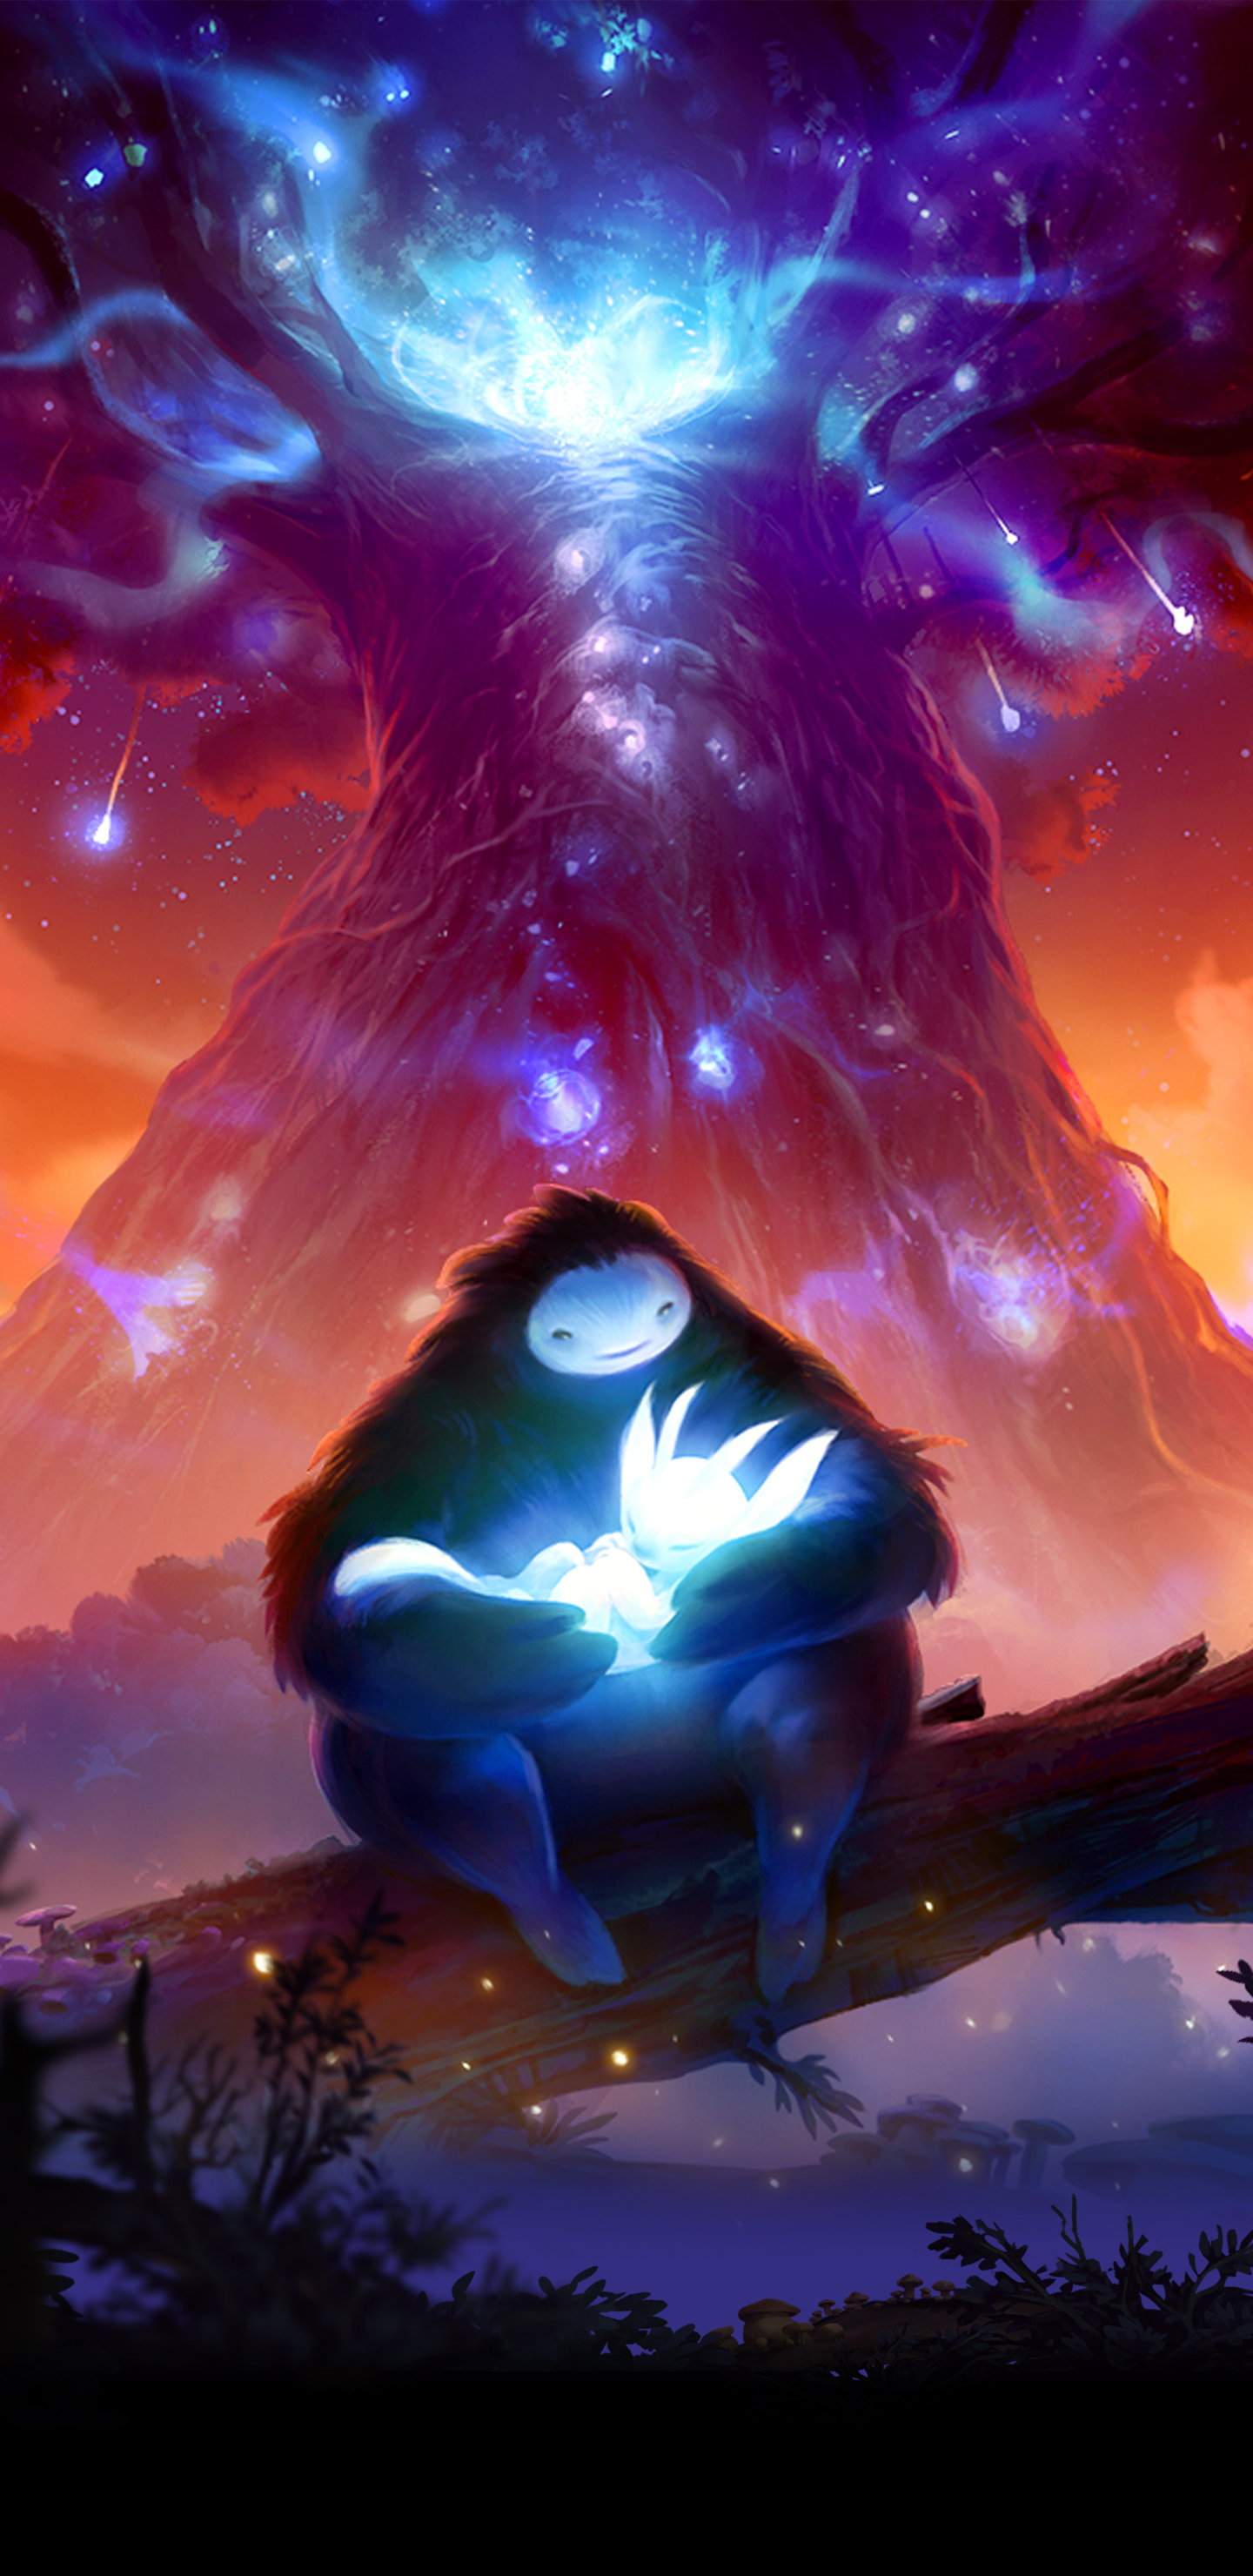 1440x2960 Ori and the Blind Forest Cover Wallpaper Cat with Monocle